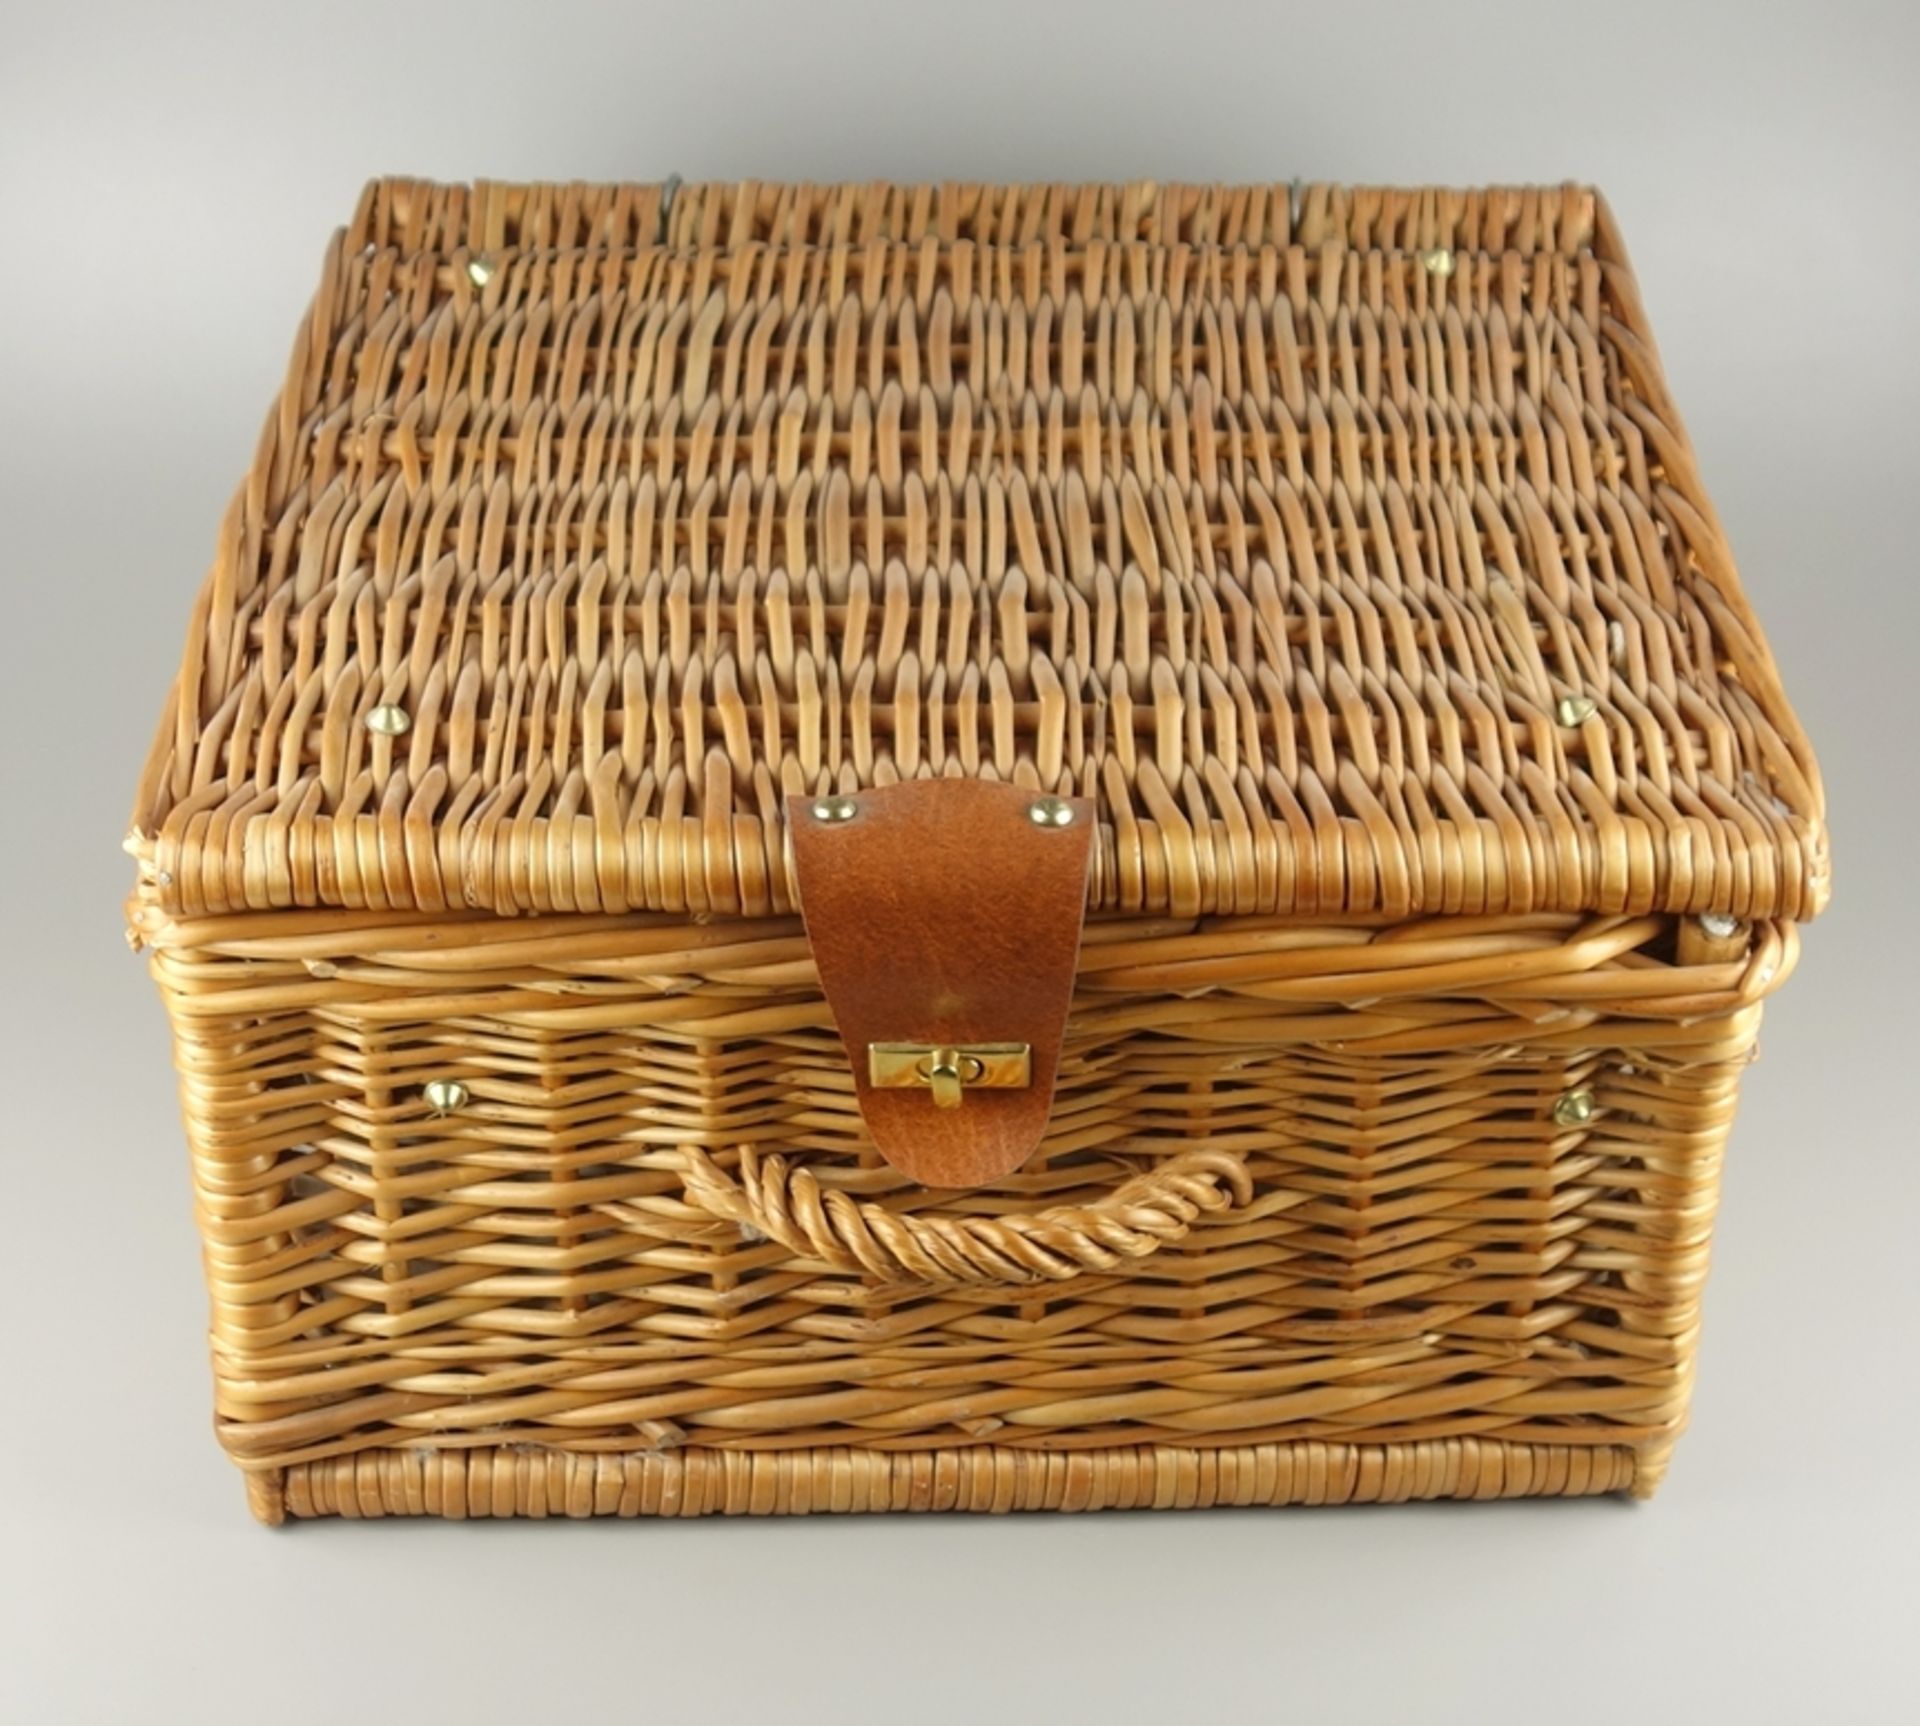 Picnic case, equipped with china and cutlery for 2 pers.